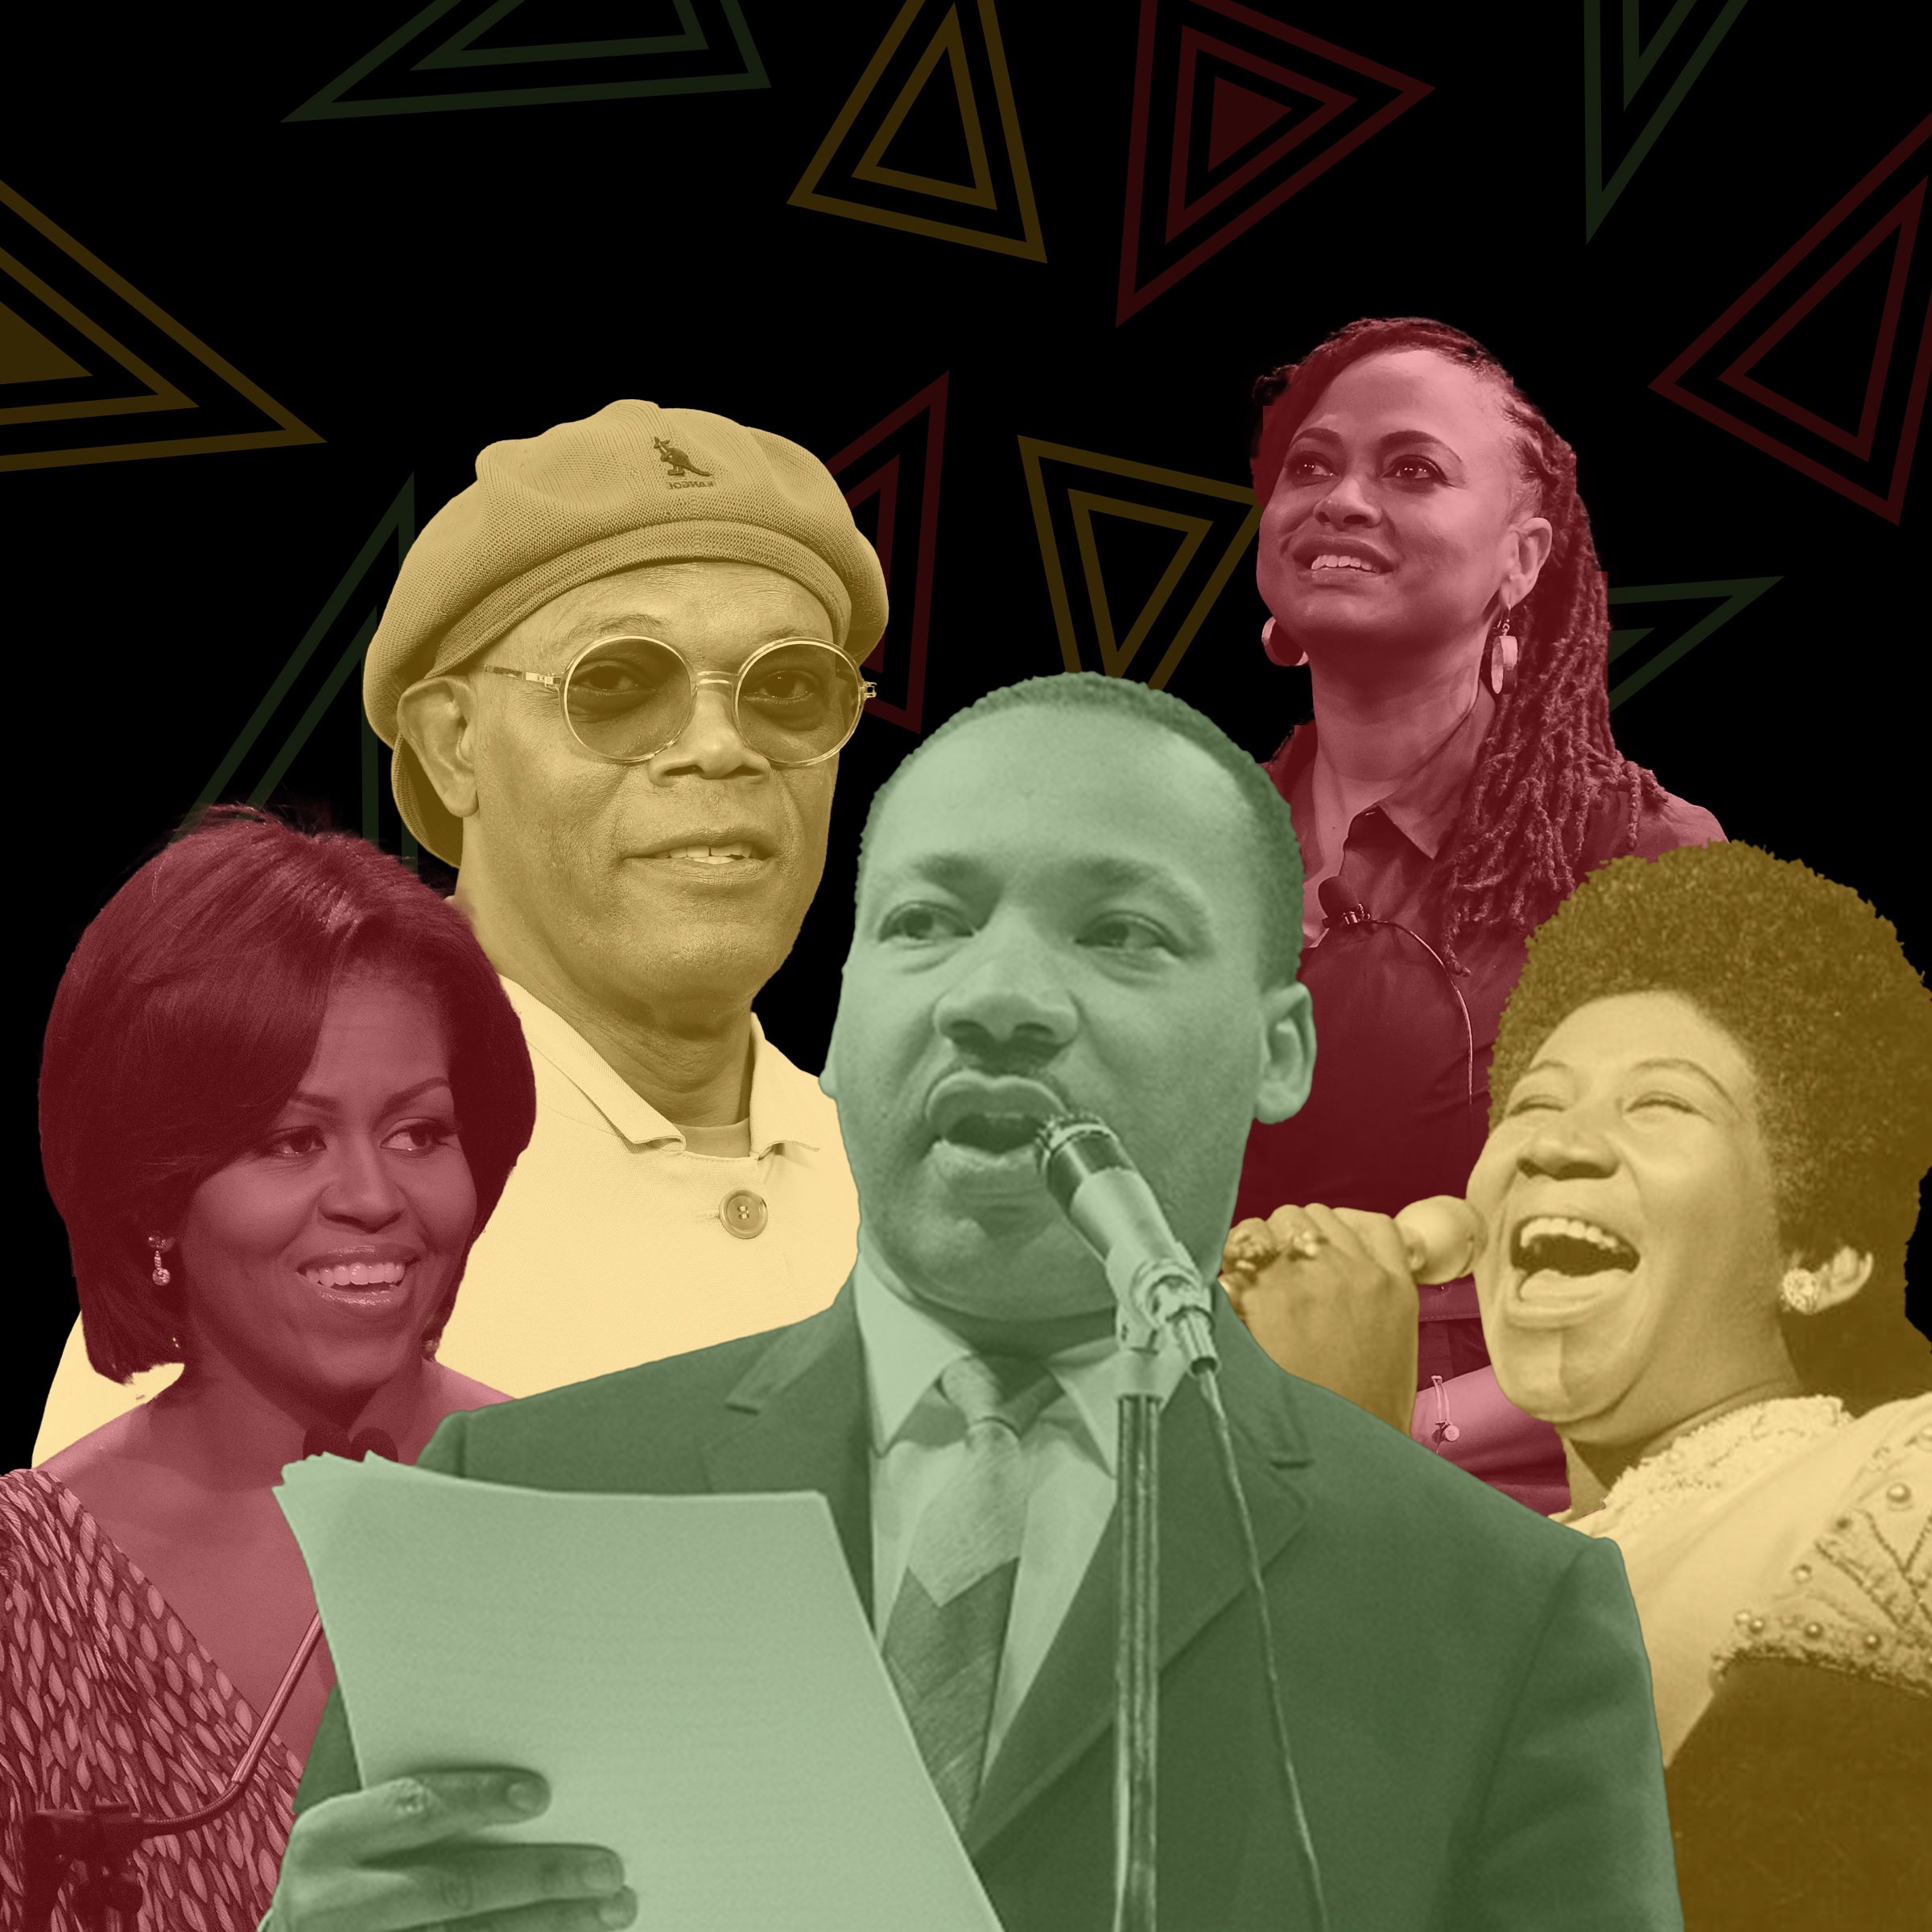 42 Black History Movies 2023 - Movies for Black History Month